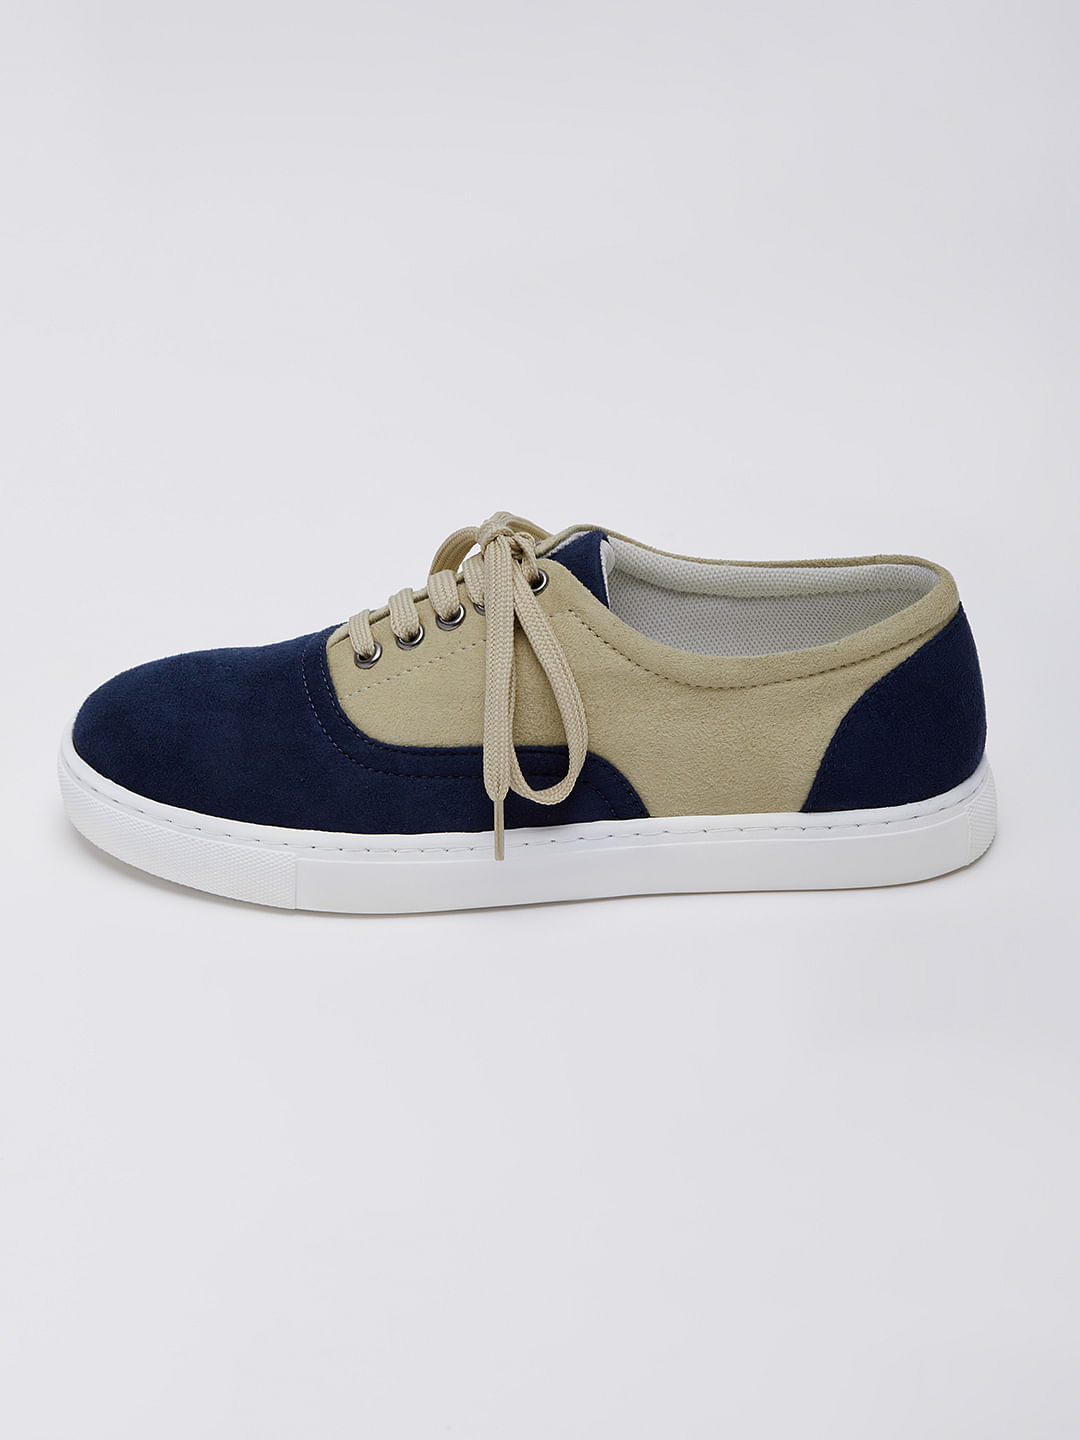 Buy Colour Block Basics Blue And White For Women Lace Up Shoes Online